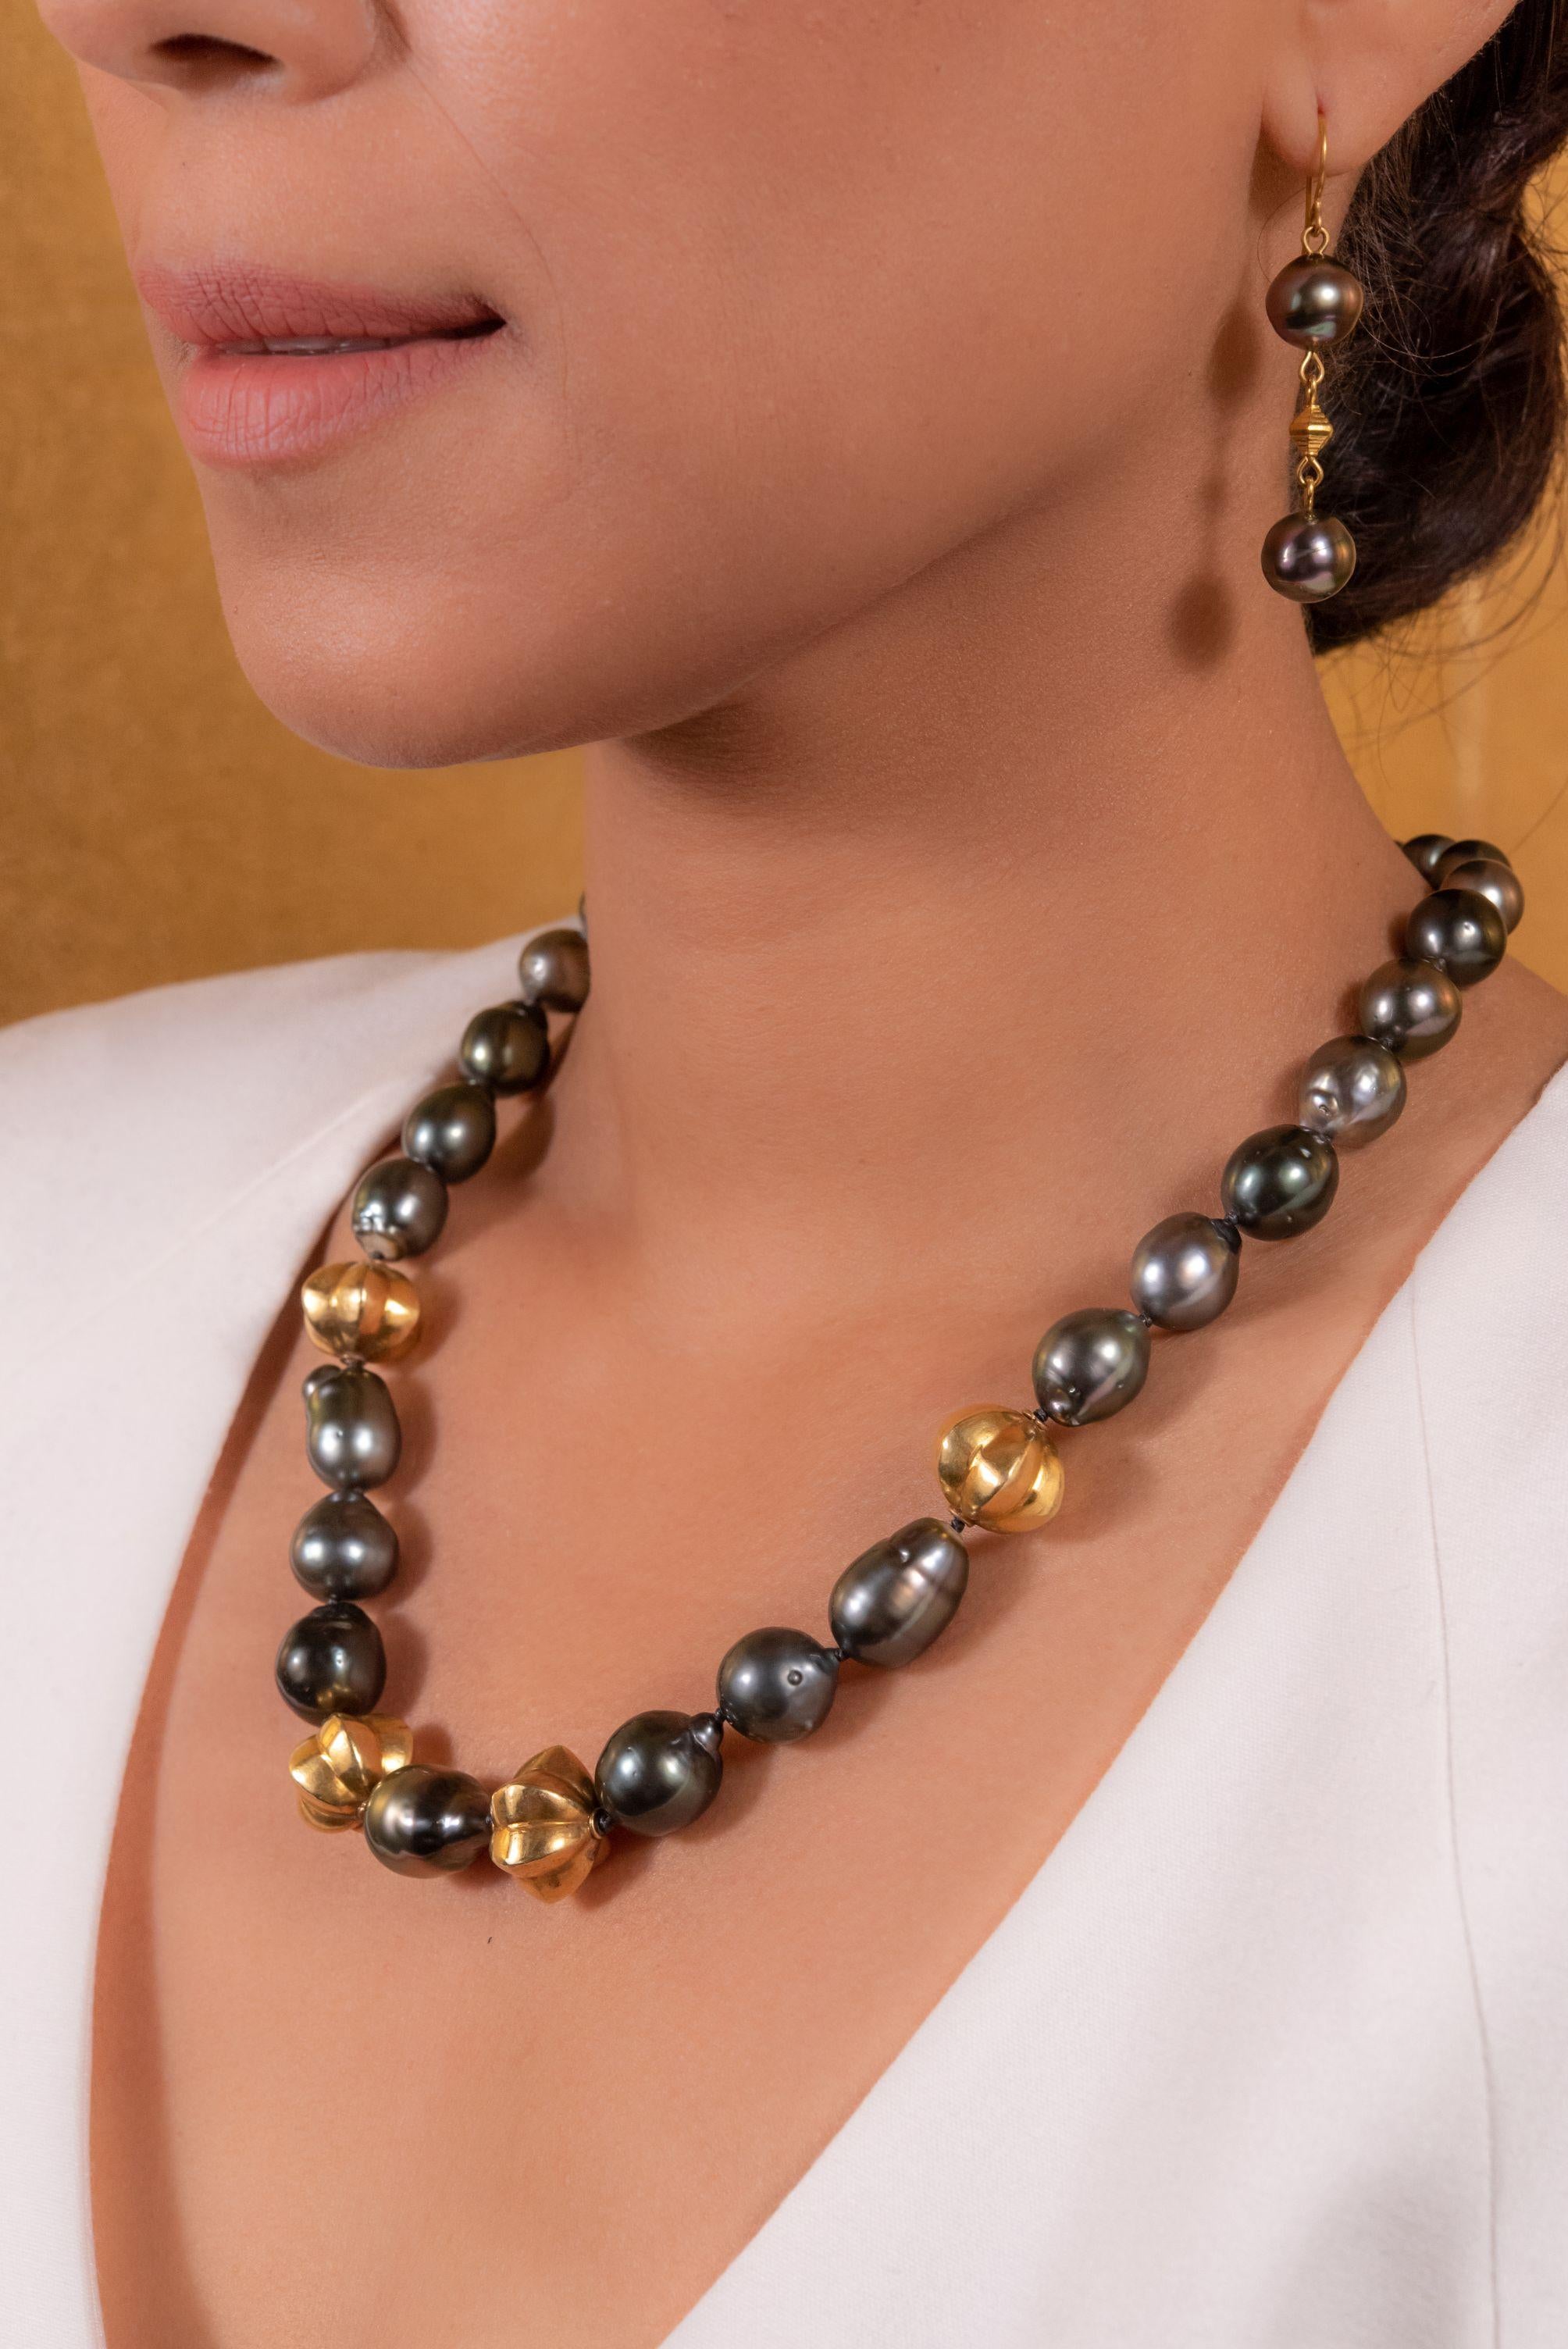 Star fruit and pearls collide for unmatched tropical elegance. Our stunning star fruit necklace features luxurious, glossy black Tahitian pearls interspersed with vintage gold-plated Sumatran beads, taking you to a tropical island no matter where